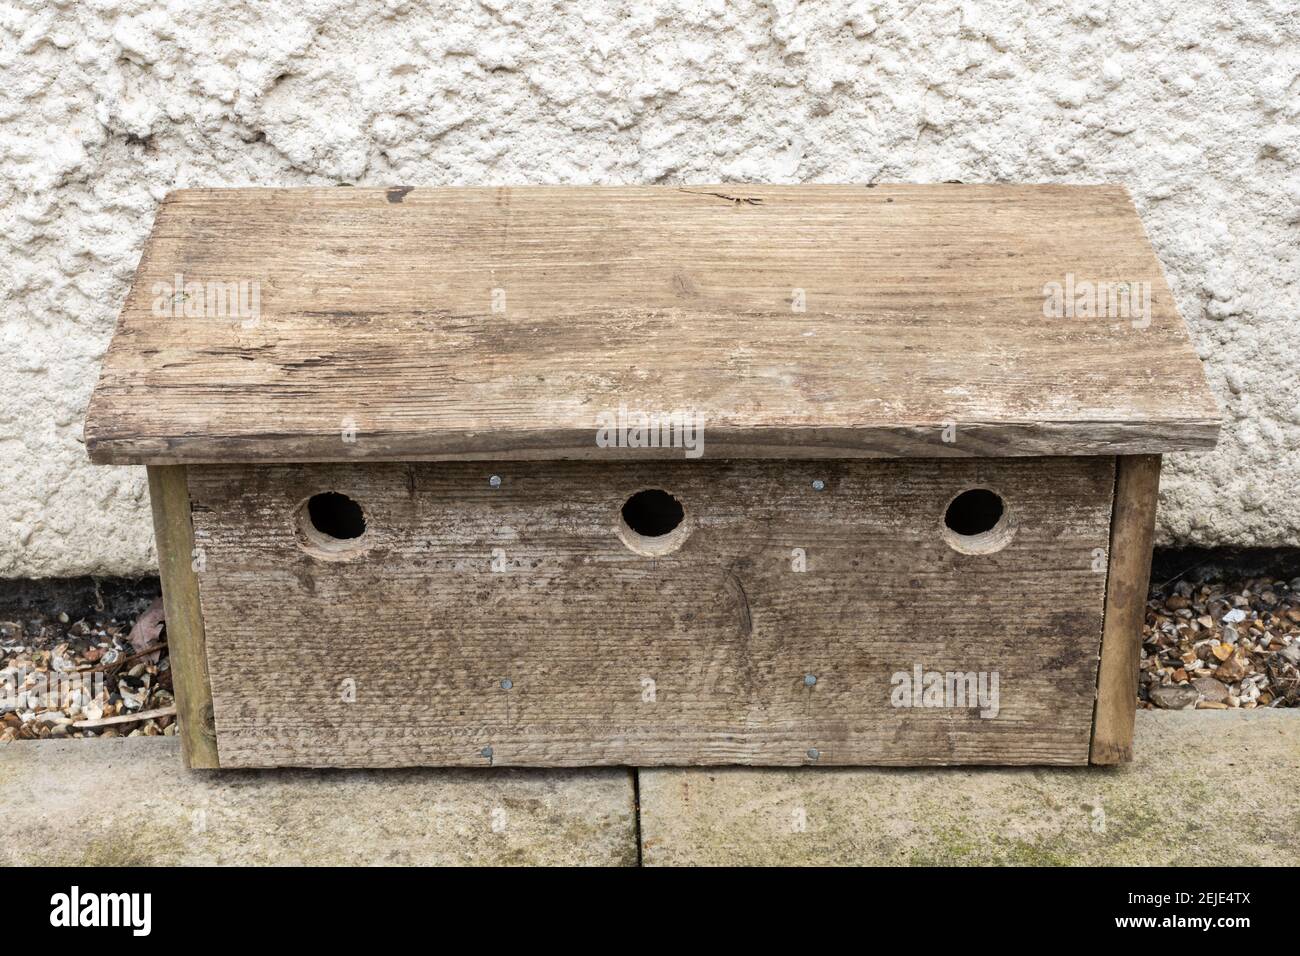 Homemade sparrow box, wooden bird nesting box for house sparrows with three chambers and holes, UK, ready to be put up Stock Photo